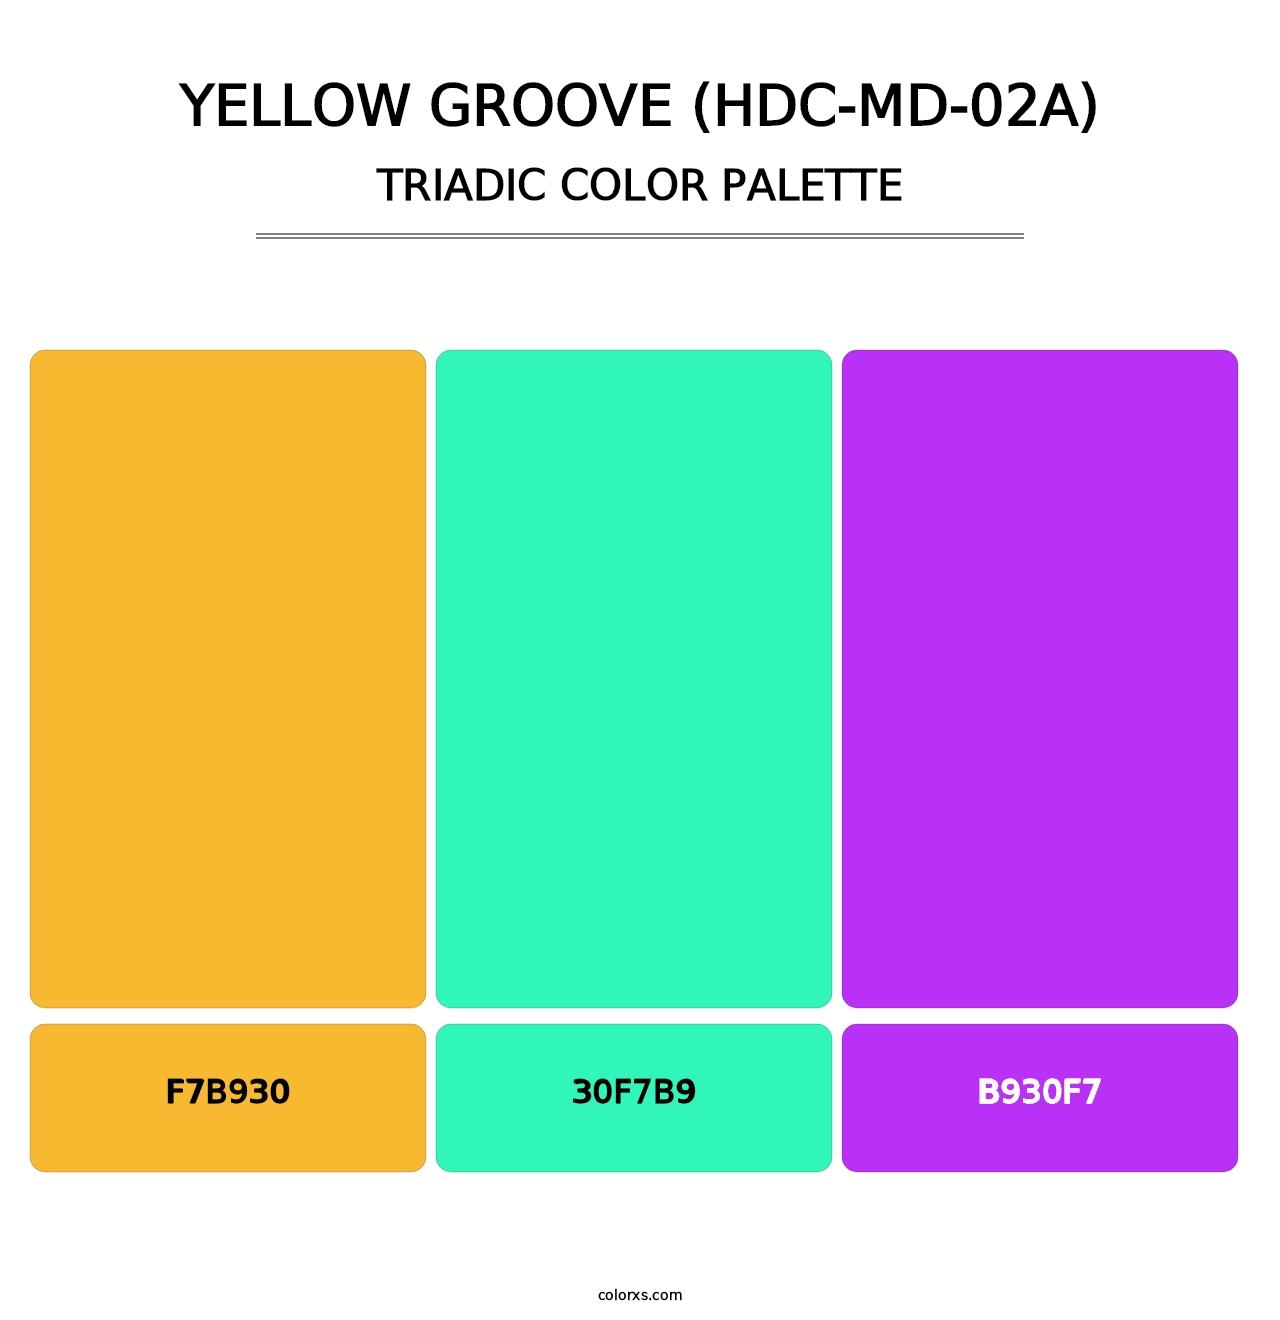 Yellow Groove (HDC-MD-02A) - Triadic Color Palette